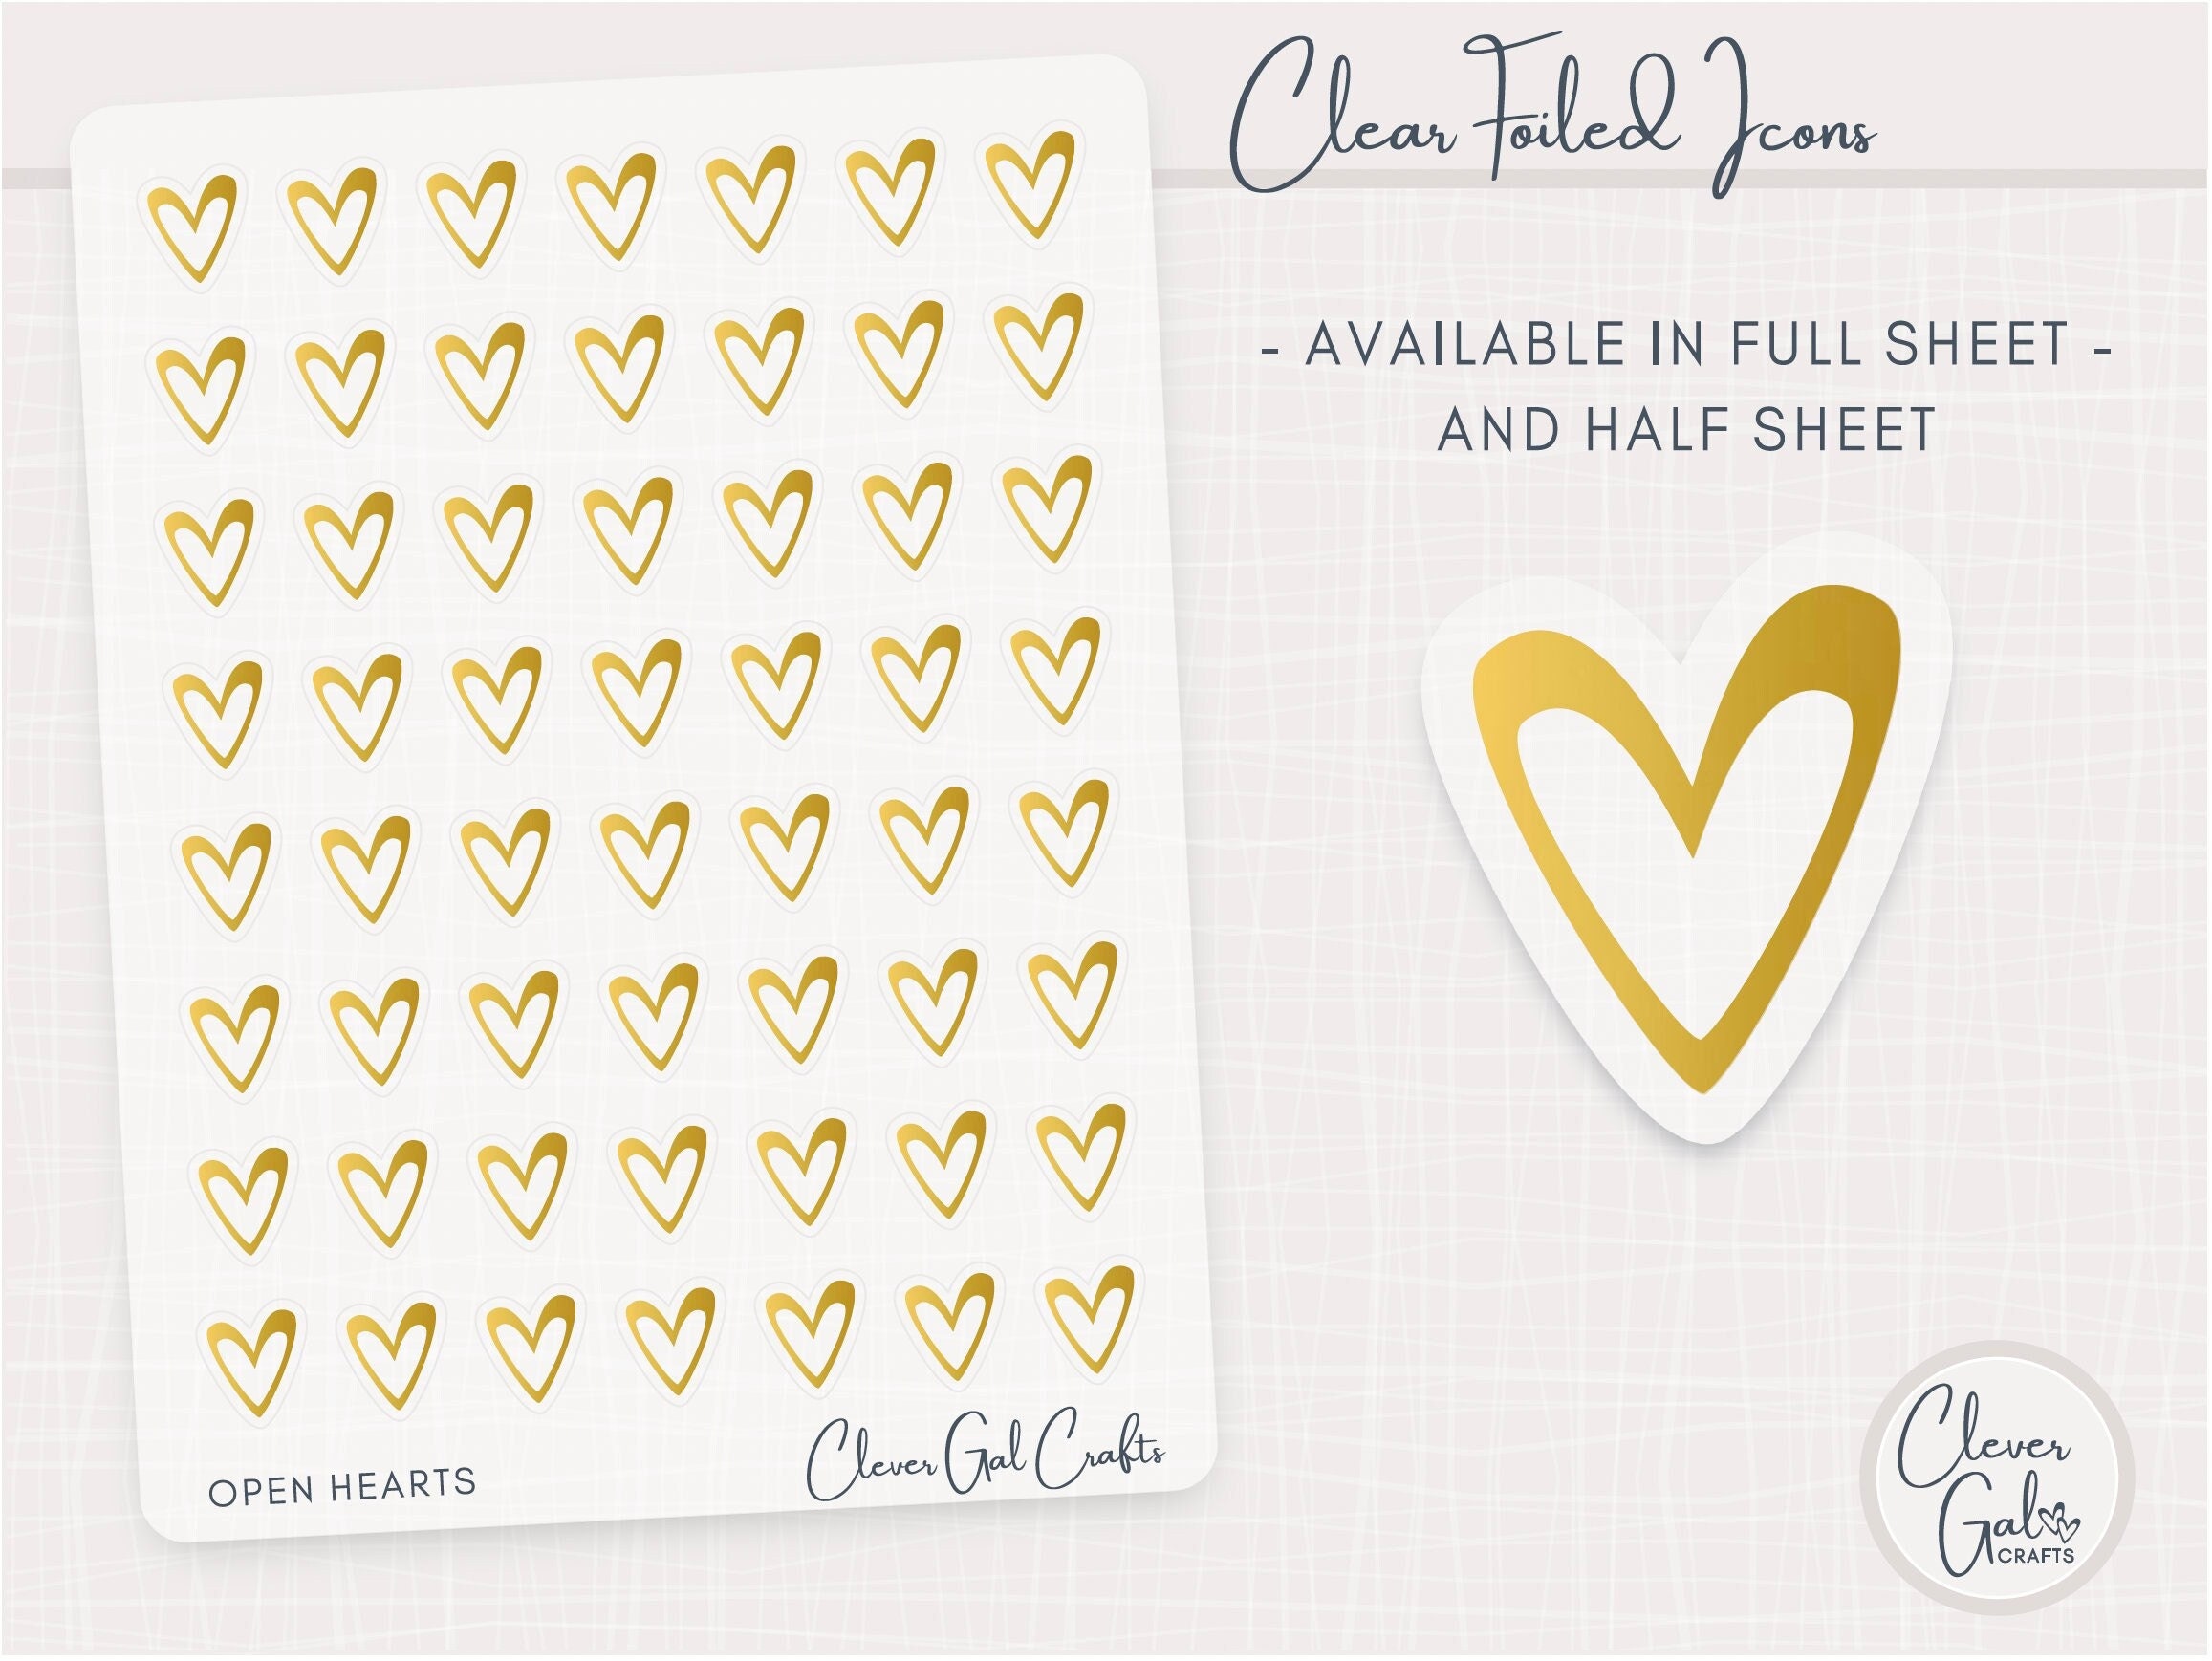 Foiled Heart Stickers for Wedding Envelope Seals, Party Decor or Business  Labels 